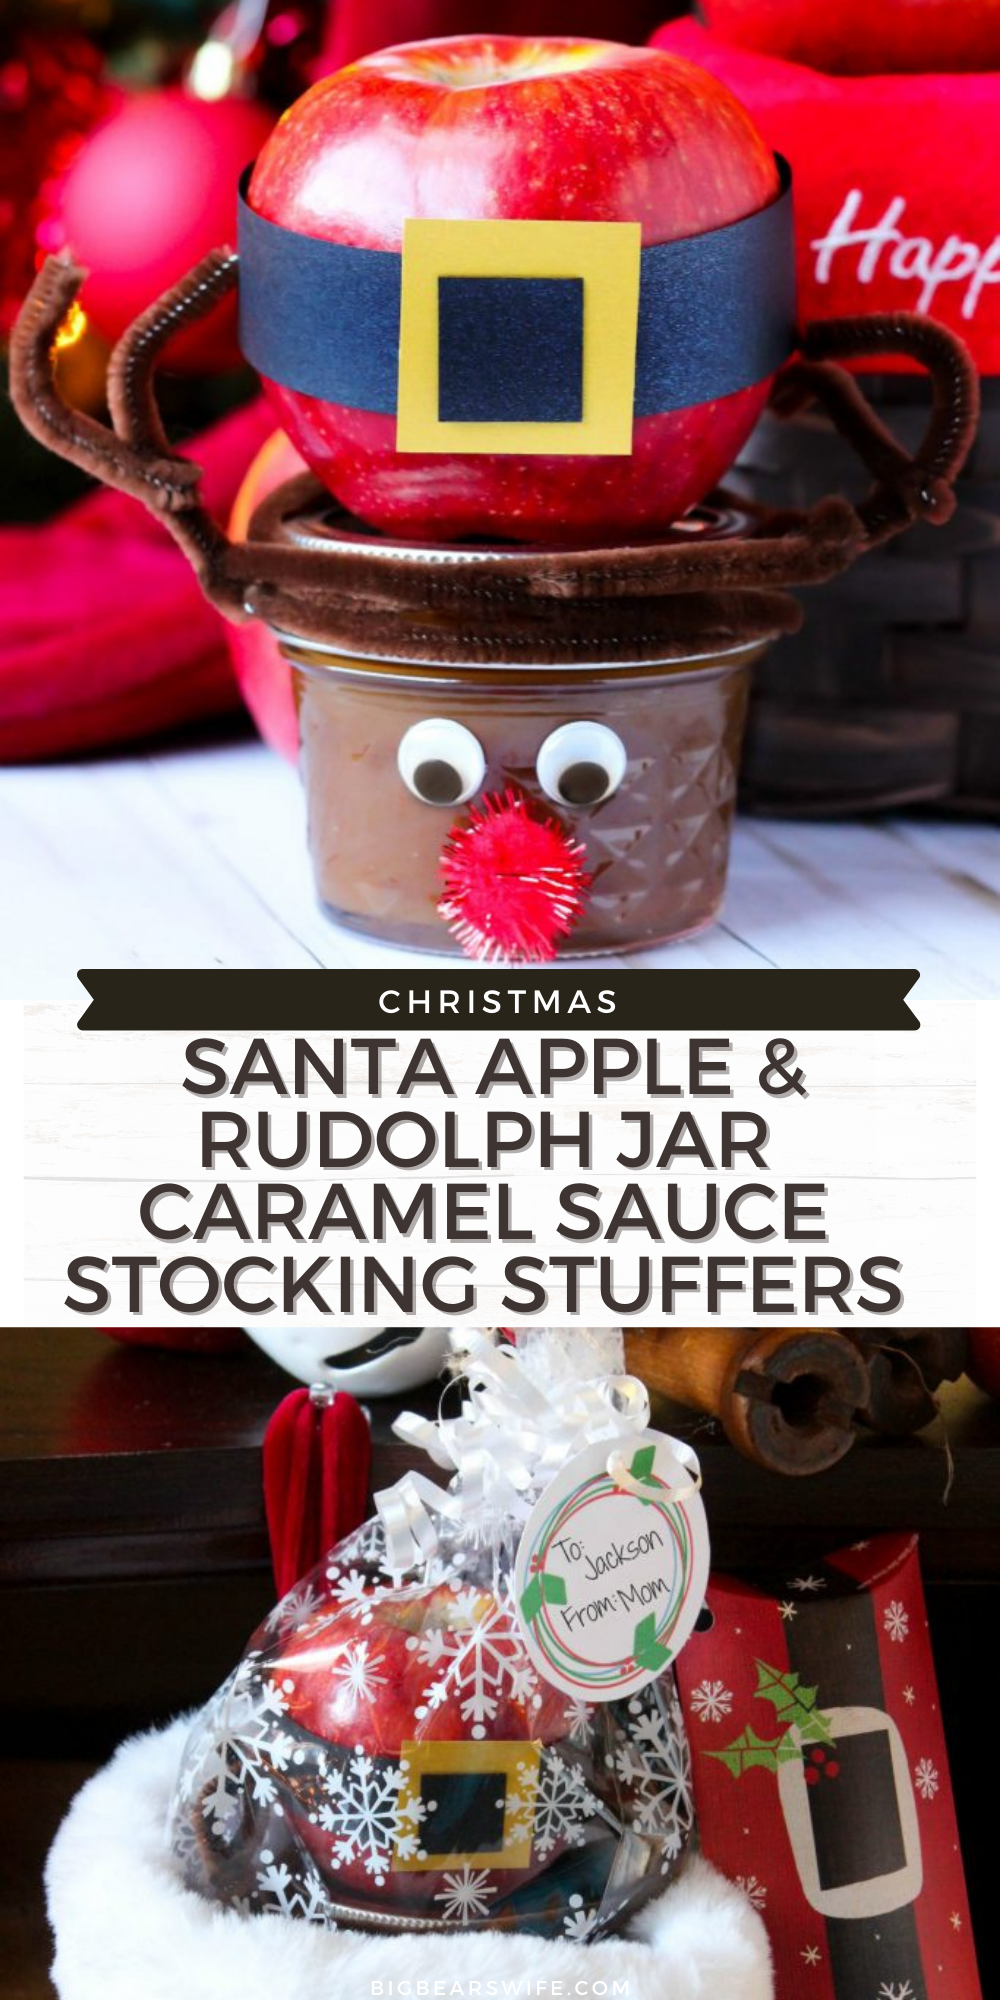 DIY Santa Apple & Rudolph Jar Caramel Sauce Stocking Stuffers - Looking for a cute and easy stocking stuffer? These DIY Santa Apple & Rudolph Jar Caramel Sauce Stocking Stuffers are perfect for kids and adults! They're easy to make and super cute! via @bigbearswife